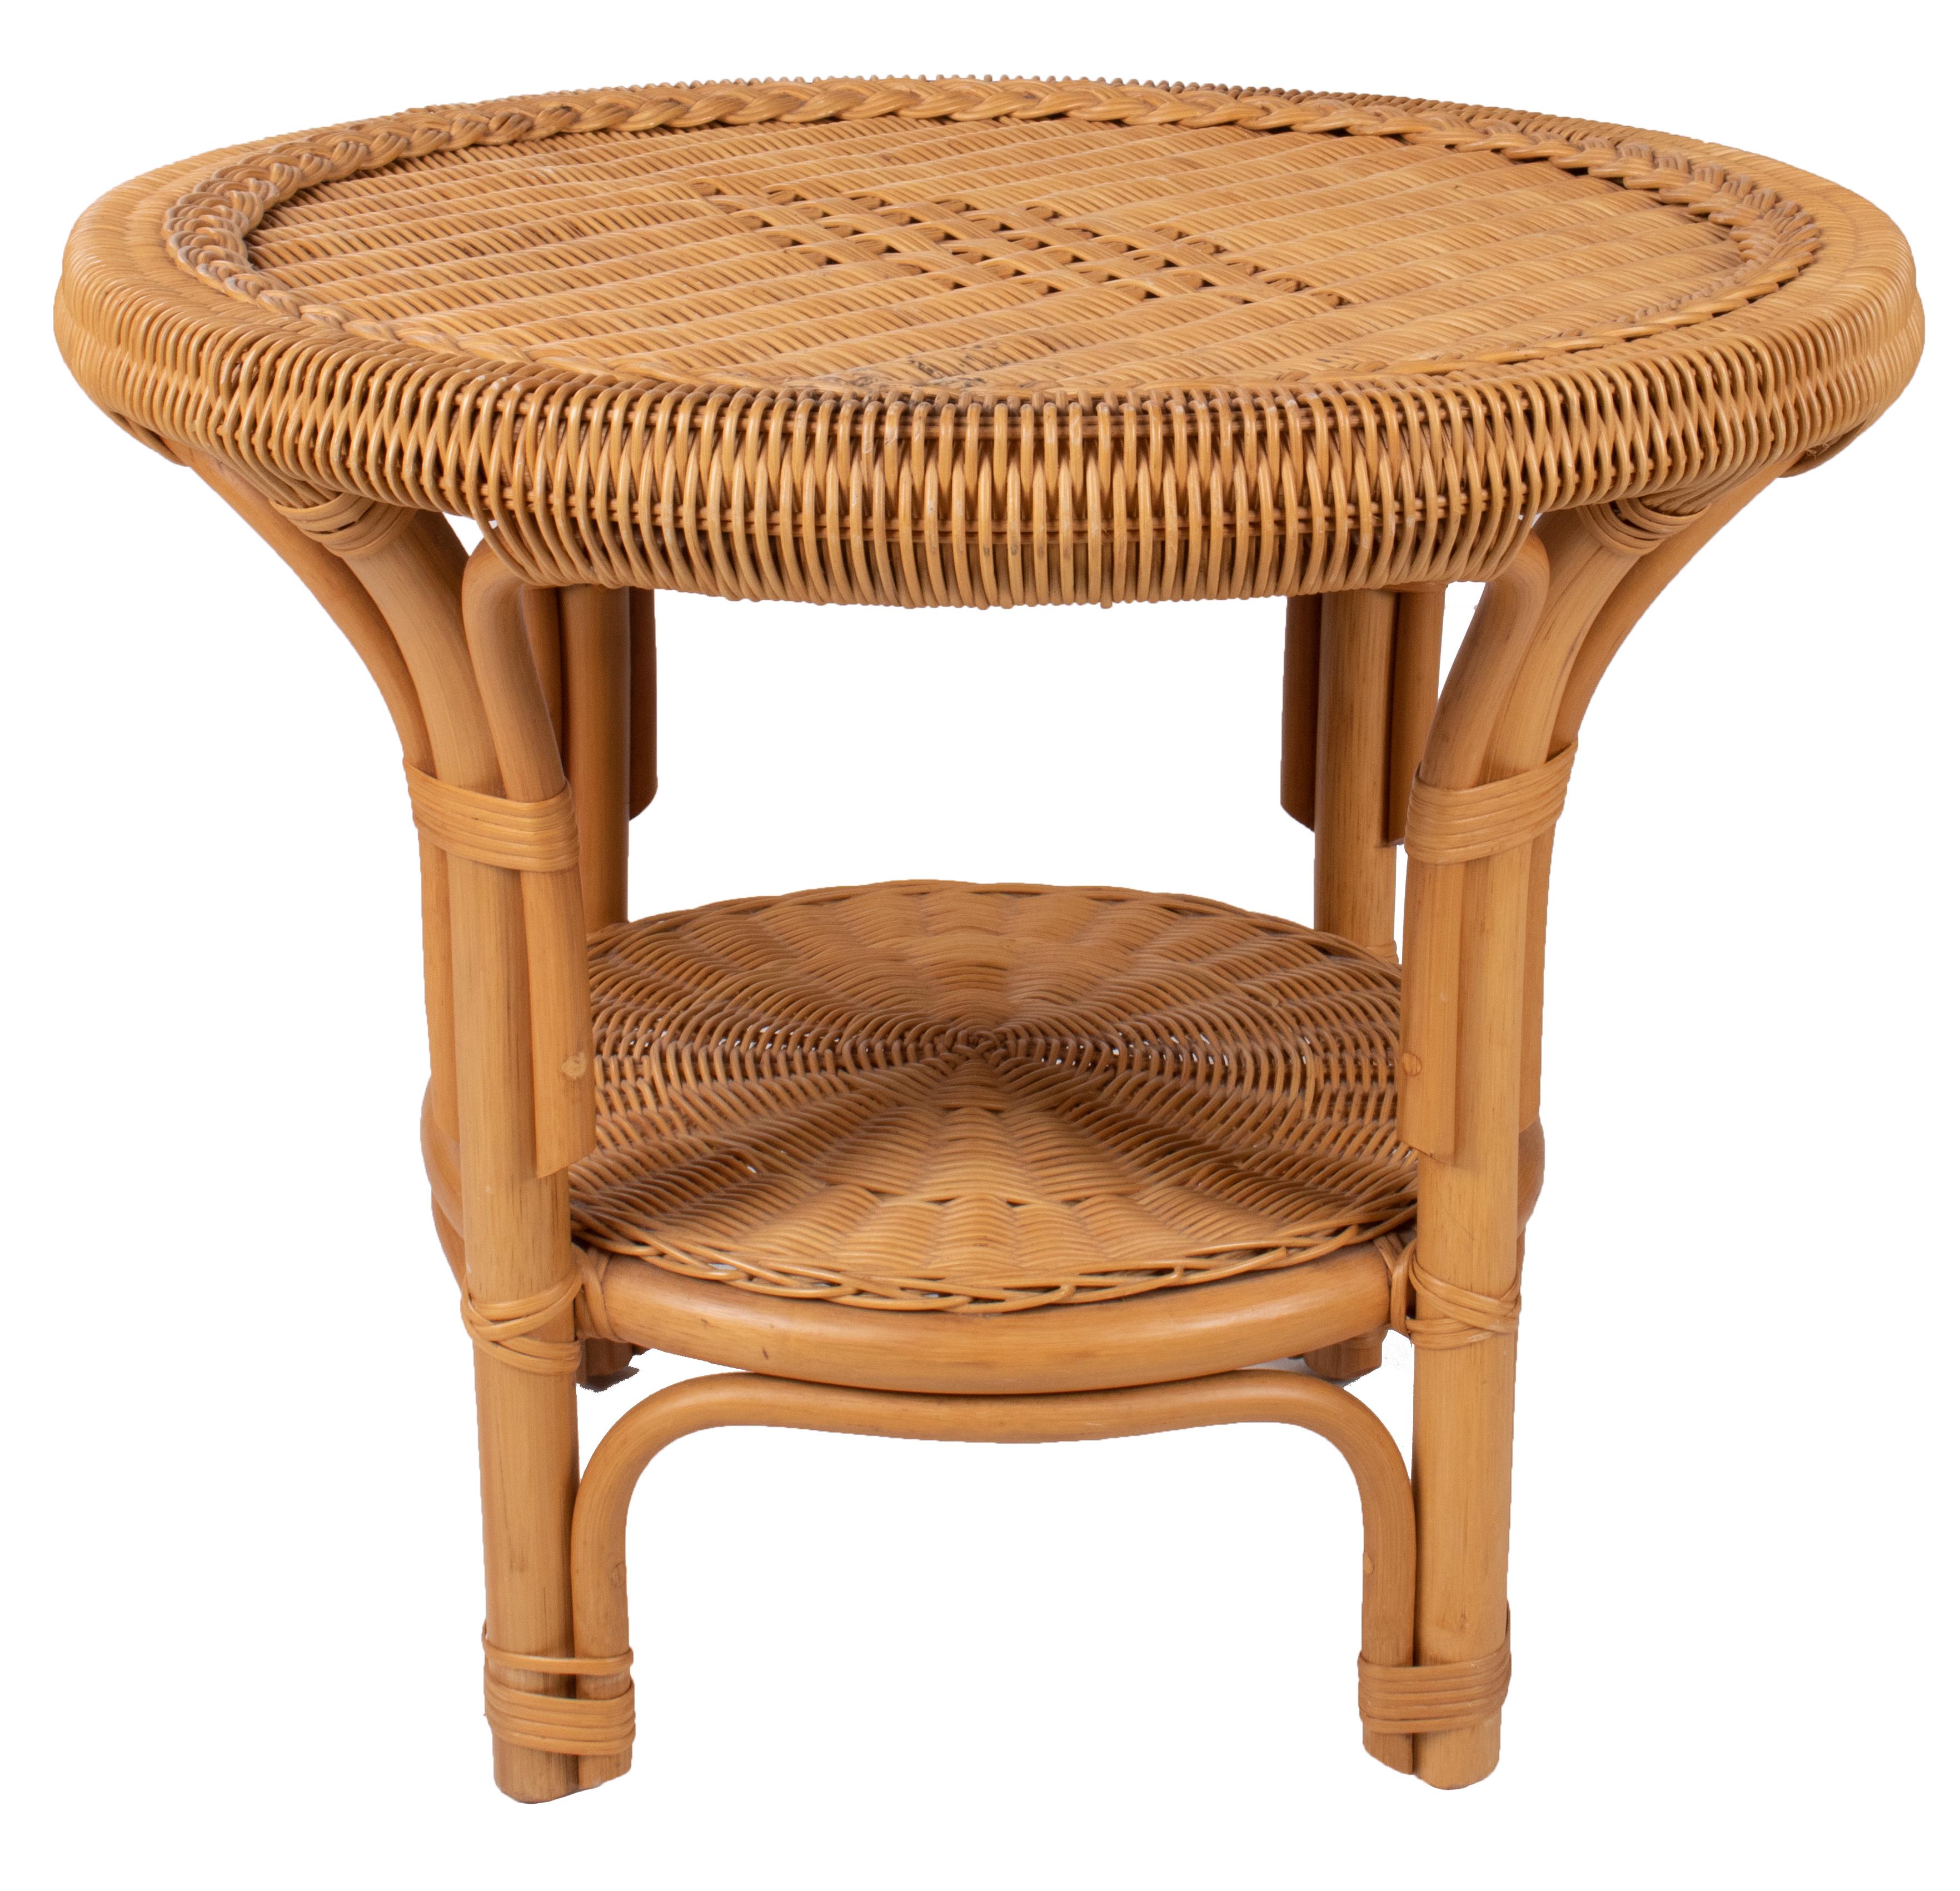 1980s Spanish bamboo and wicker round side table.